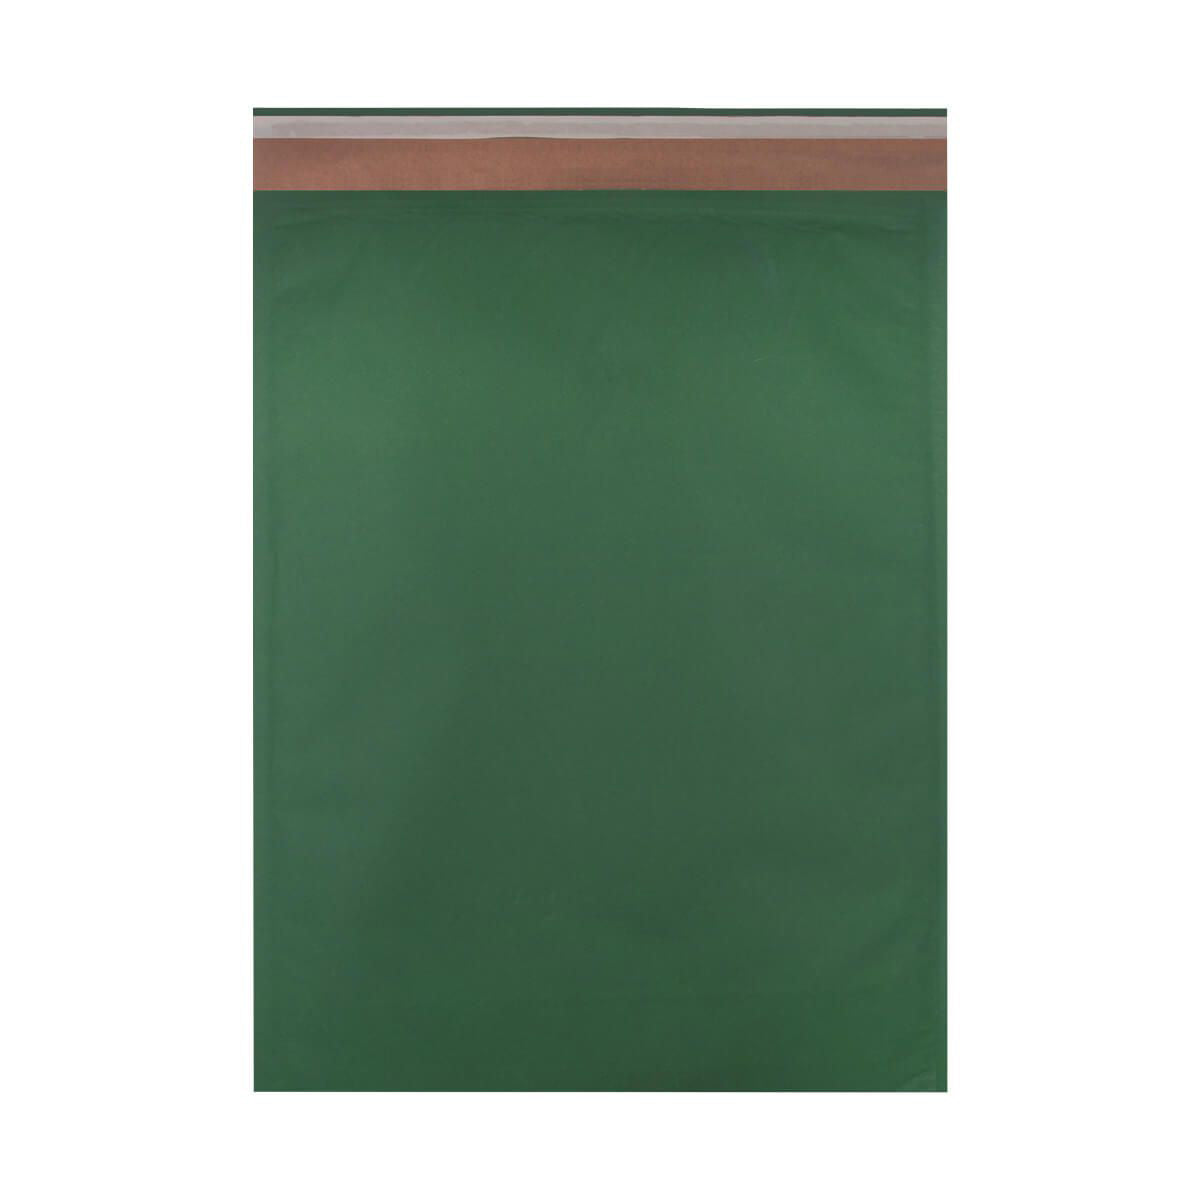 470mm x 350mm Eco Friendly Recyclable Dark Green Padded Envelope [Qty 50] - All Colour Envelopes